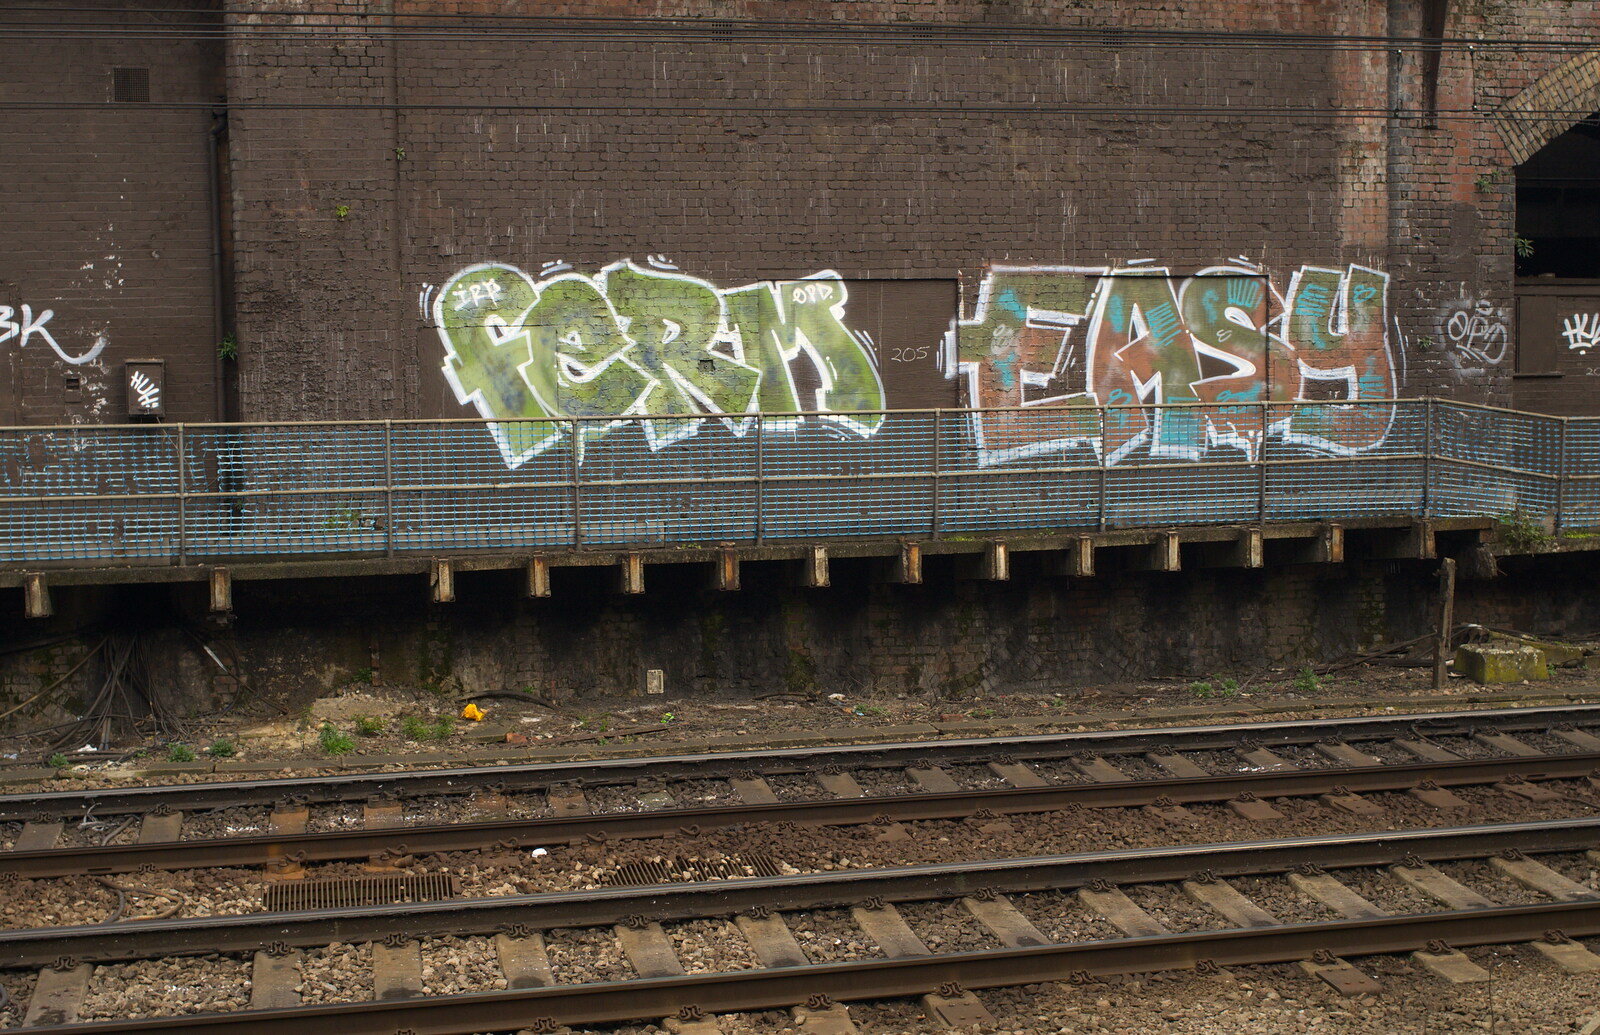 Ferm and Easy graffiti from Demolition of the Bacon Factory, and Railway Dereliction, Ipswich and London - 5th March 2013